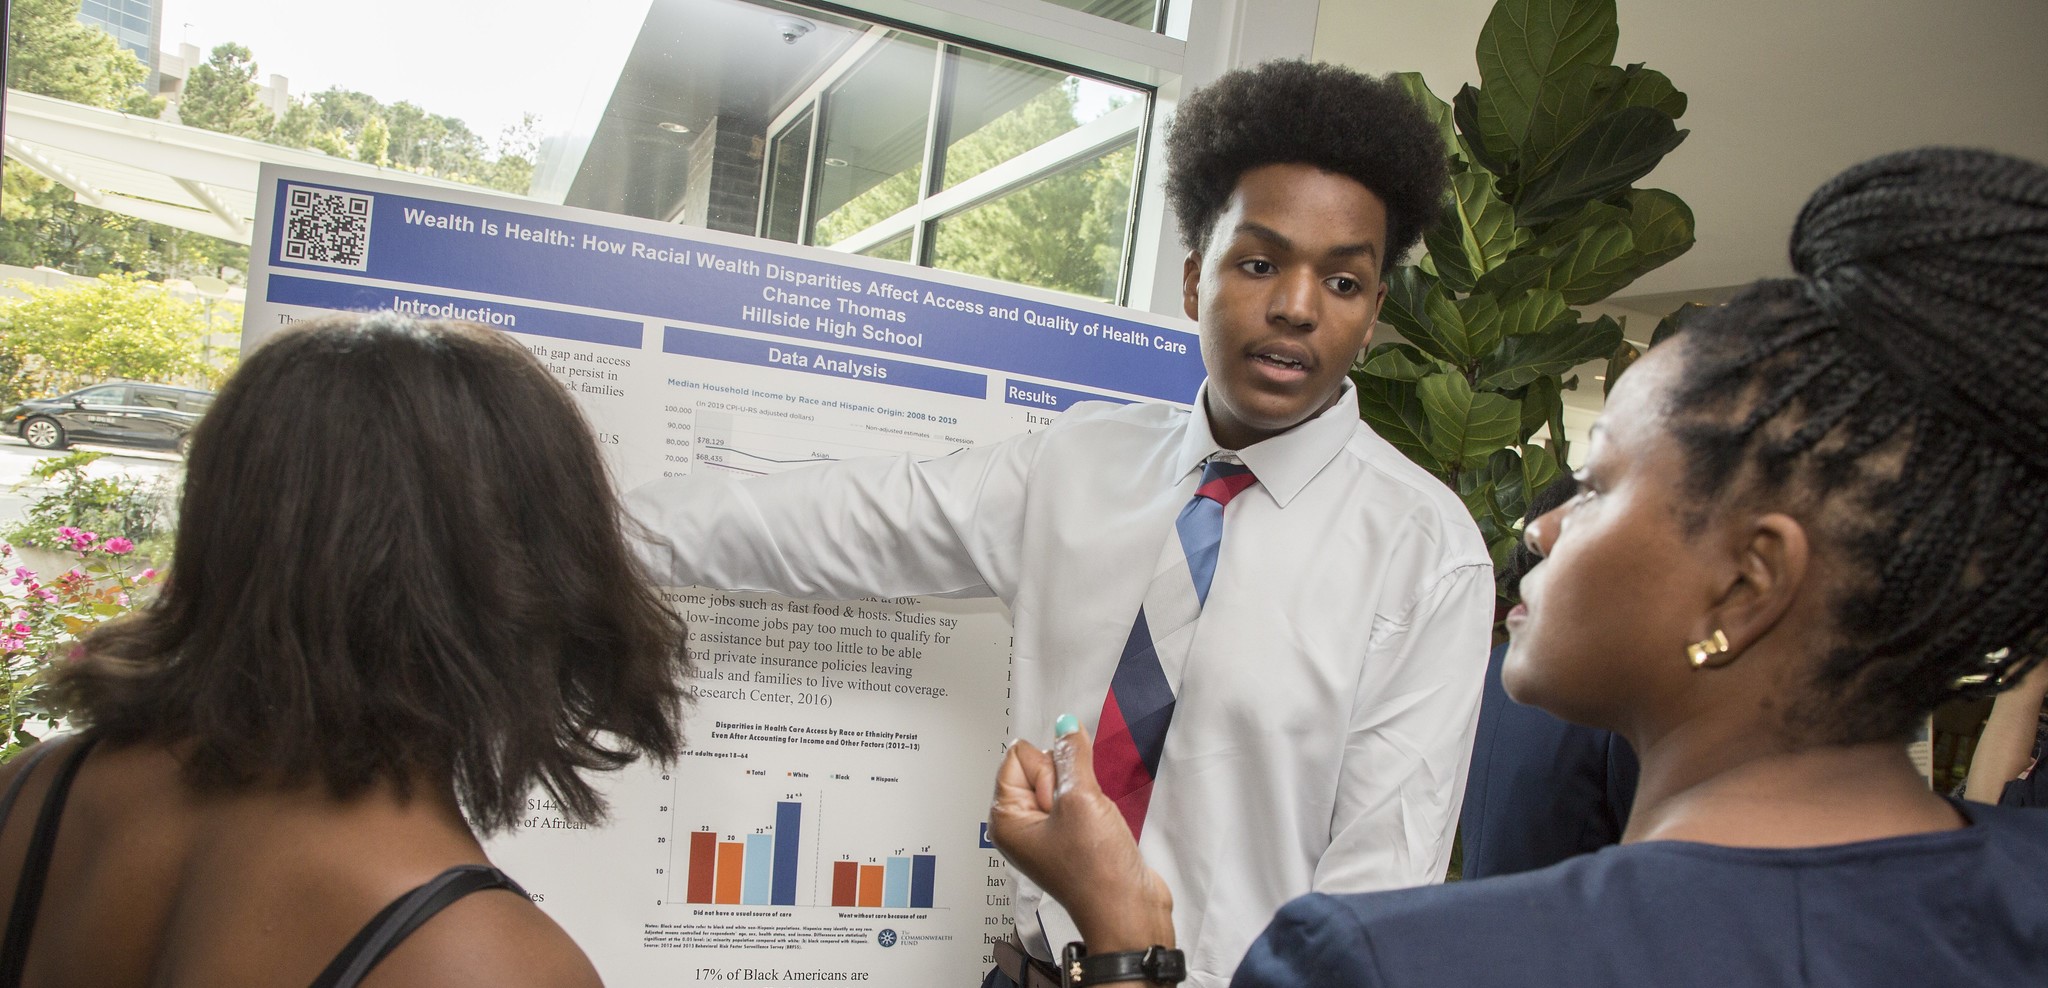 A young student presents his research on a poster board